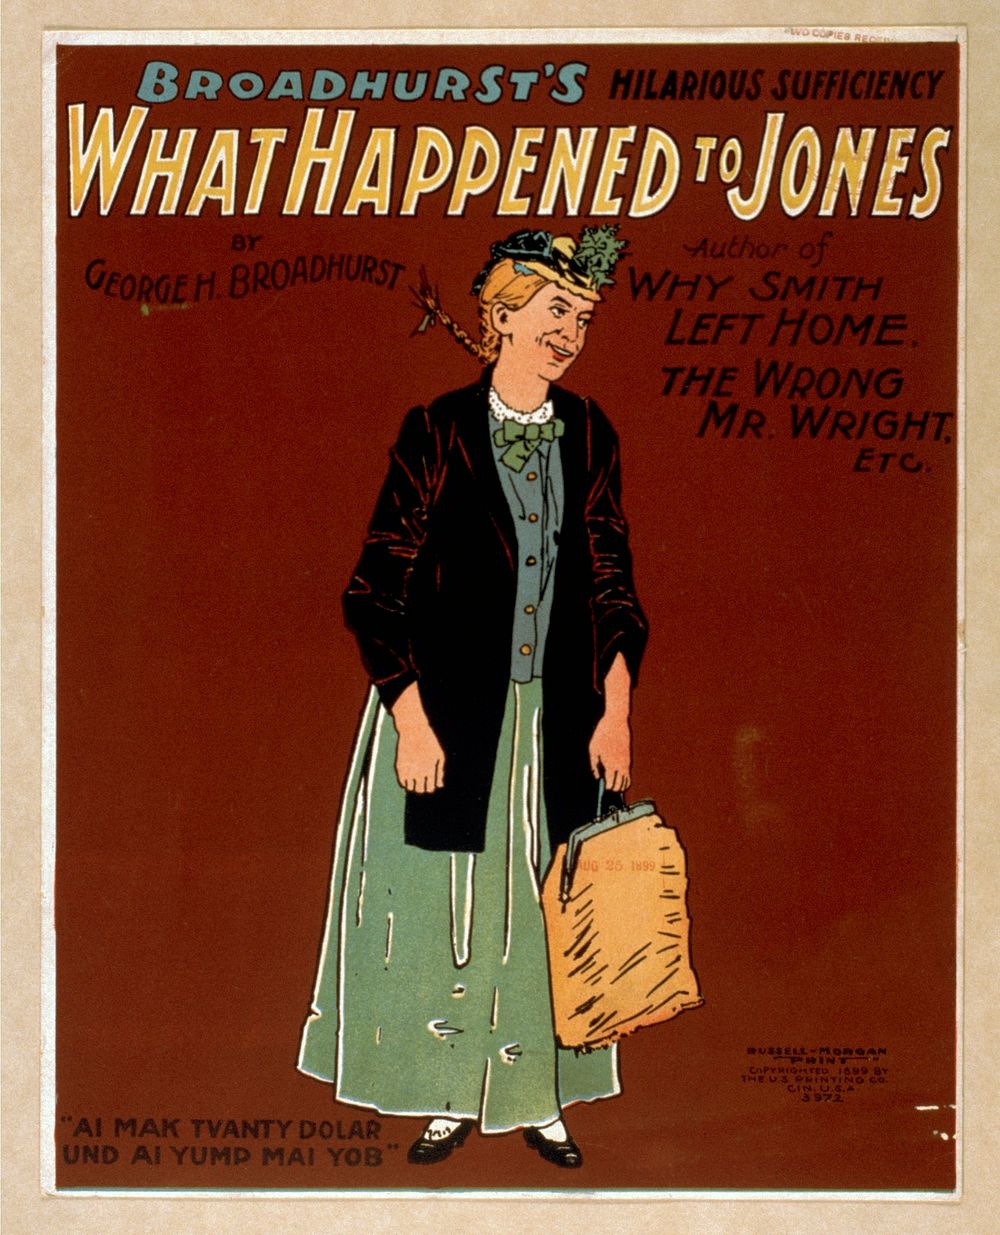 What happened to Jones Broadhurst's hilarious sufficiency : by George H. Broadhurst, author of Why Smith left home, The…